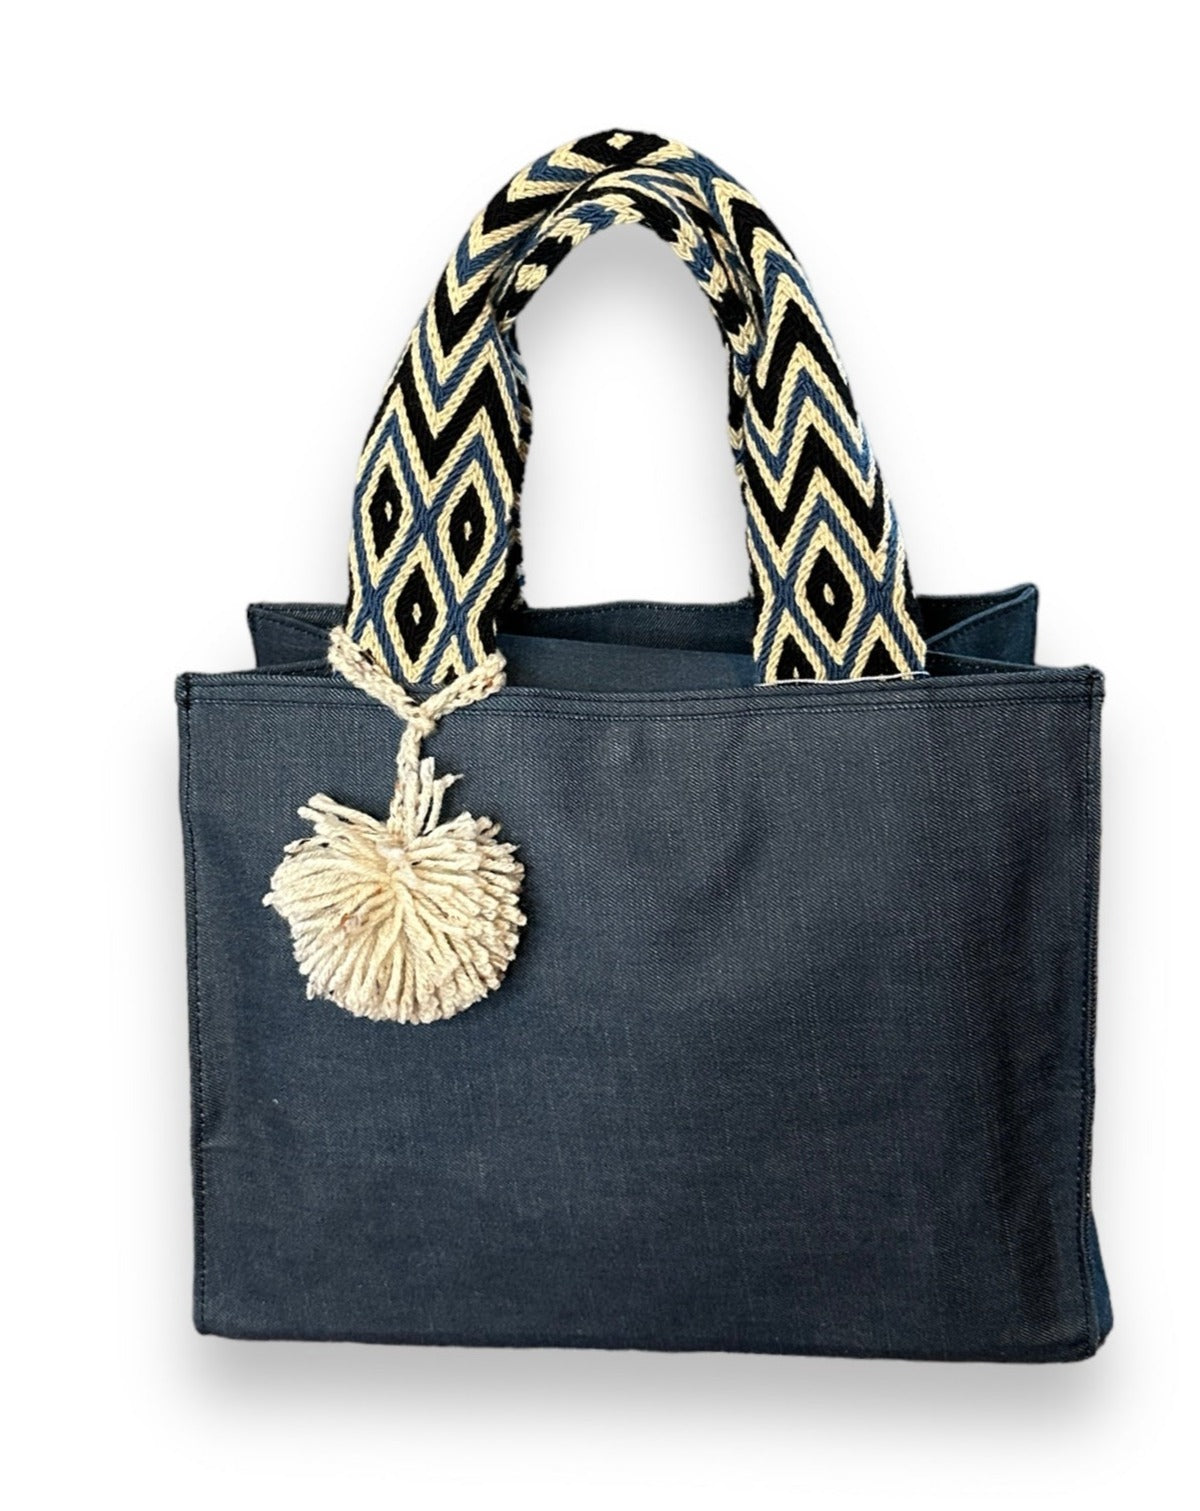 Back to the office tote. Carries your laptop and your other essentials.